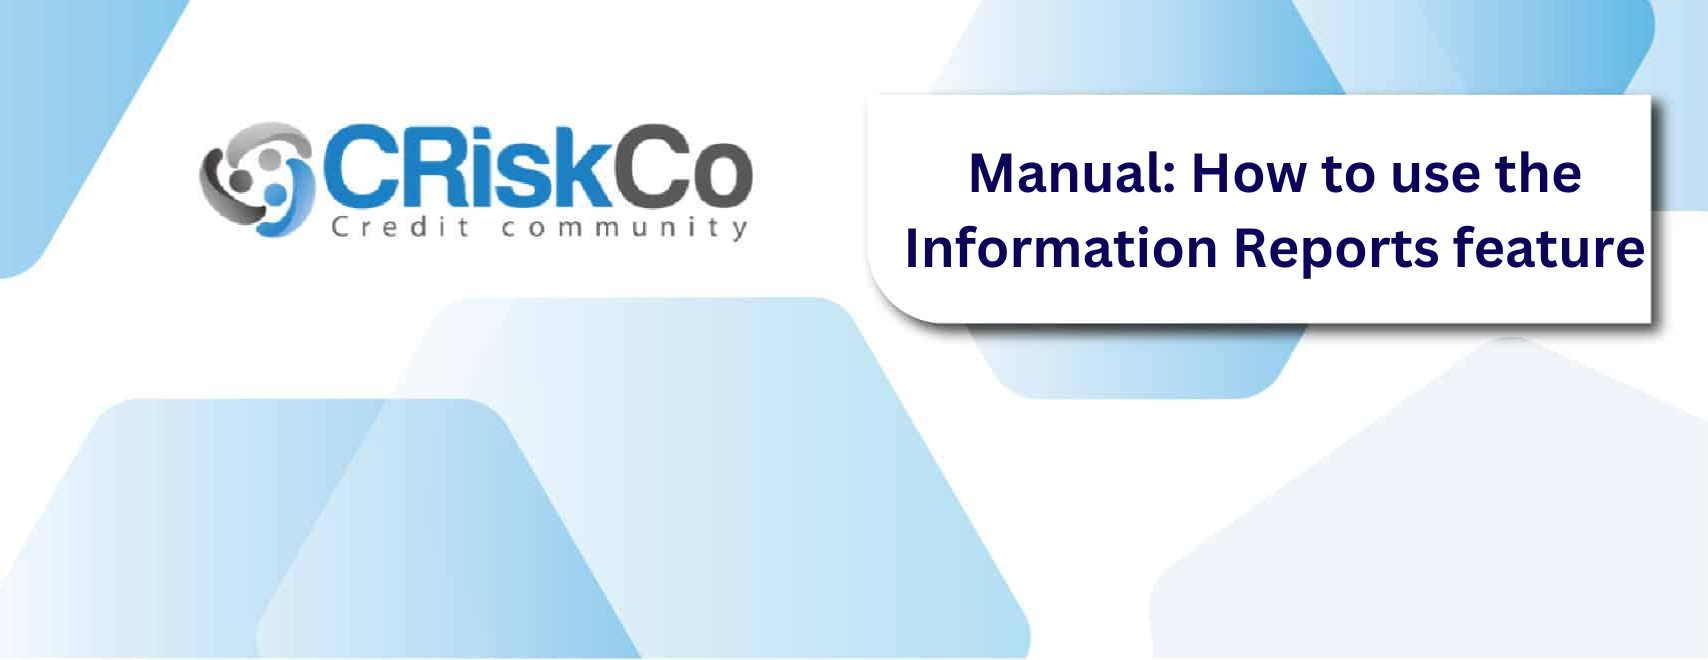 Manual: How to use the Information Reports feature